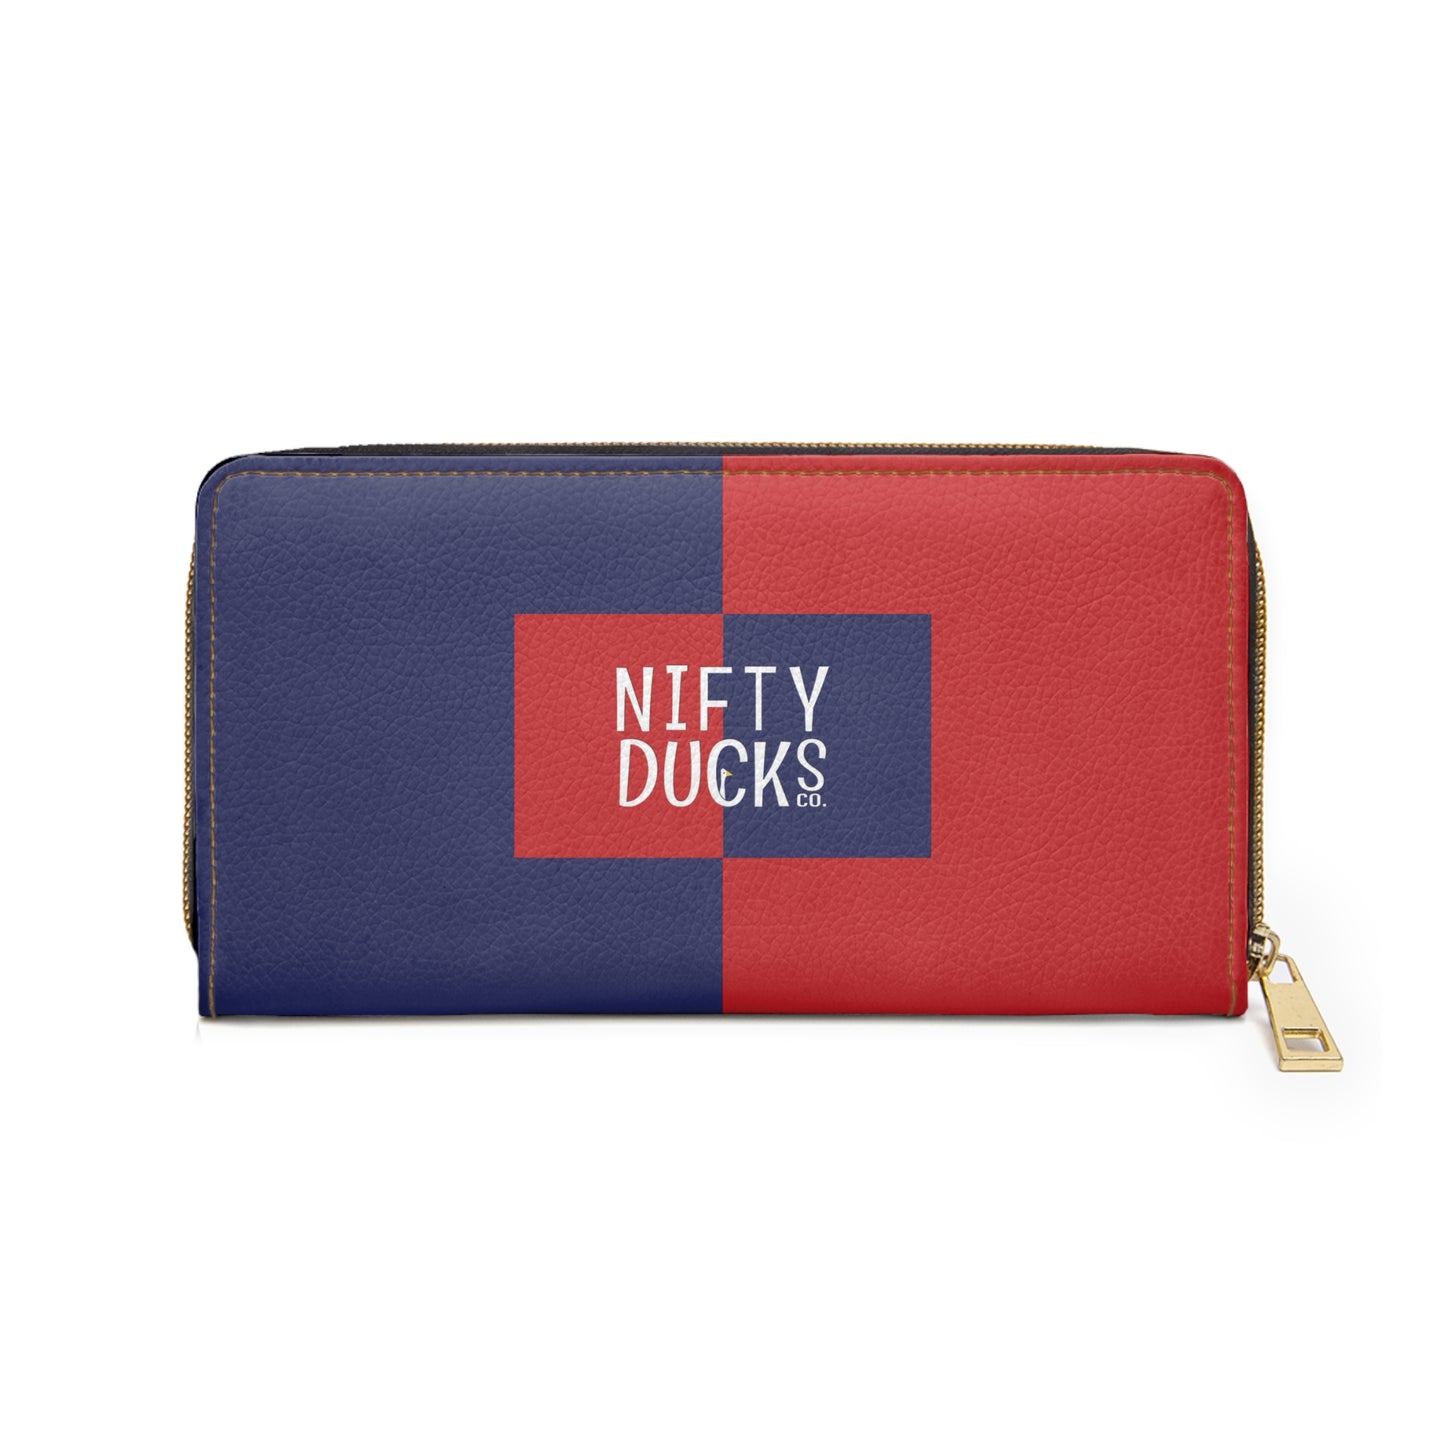 Cleveland - Red White and Blue City series - Zipper Wallet